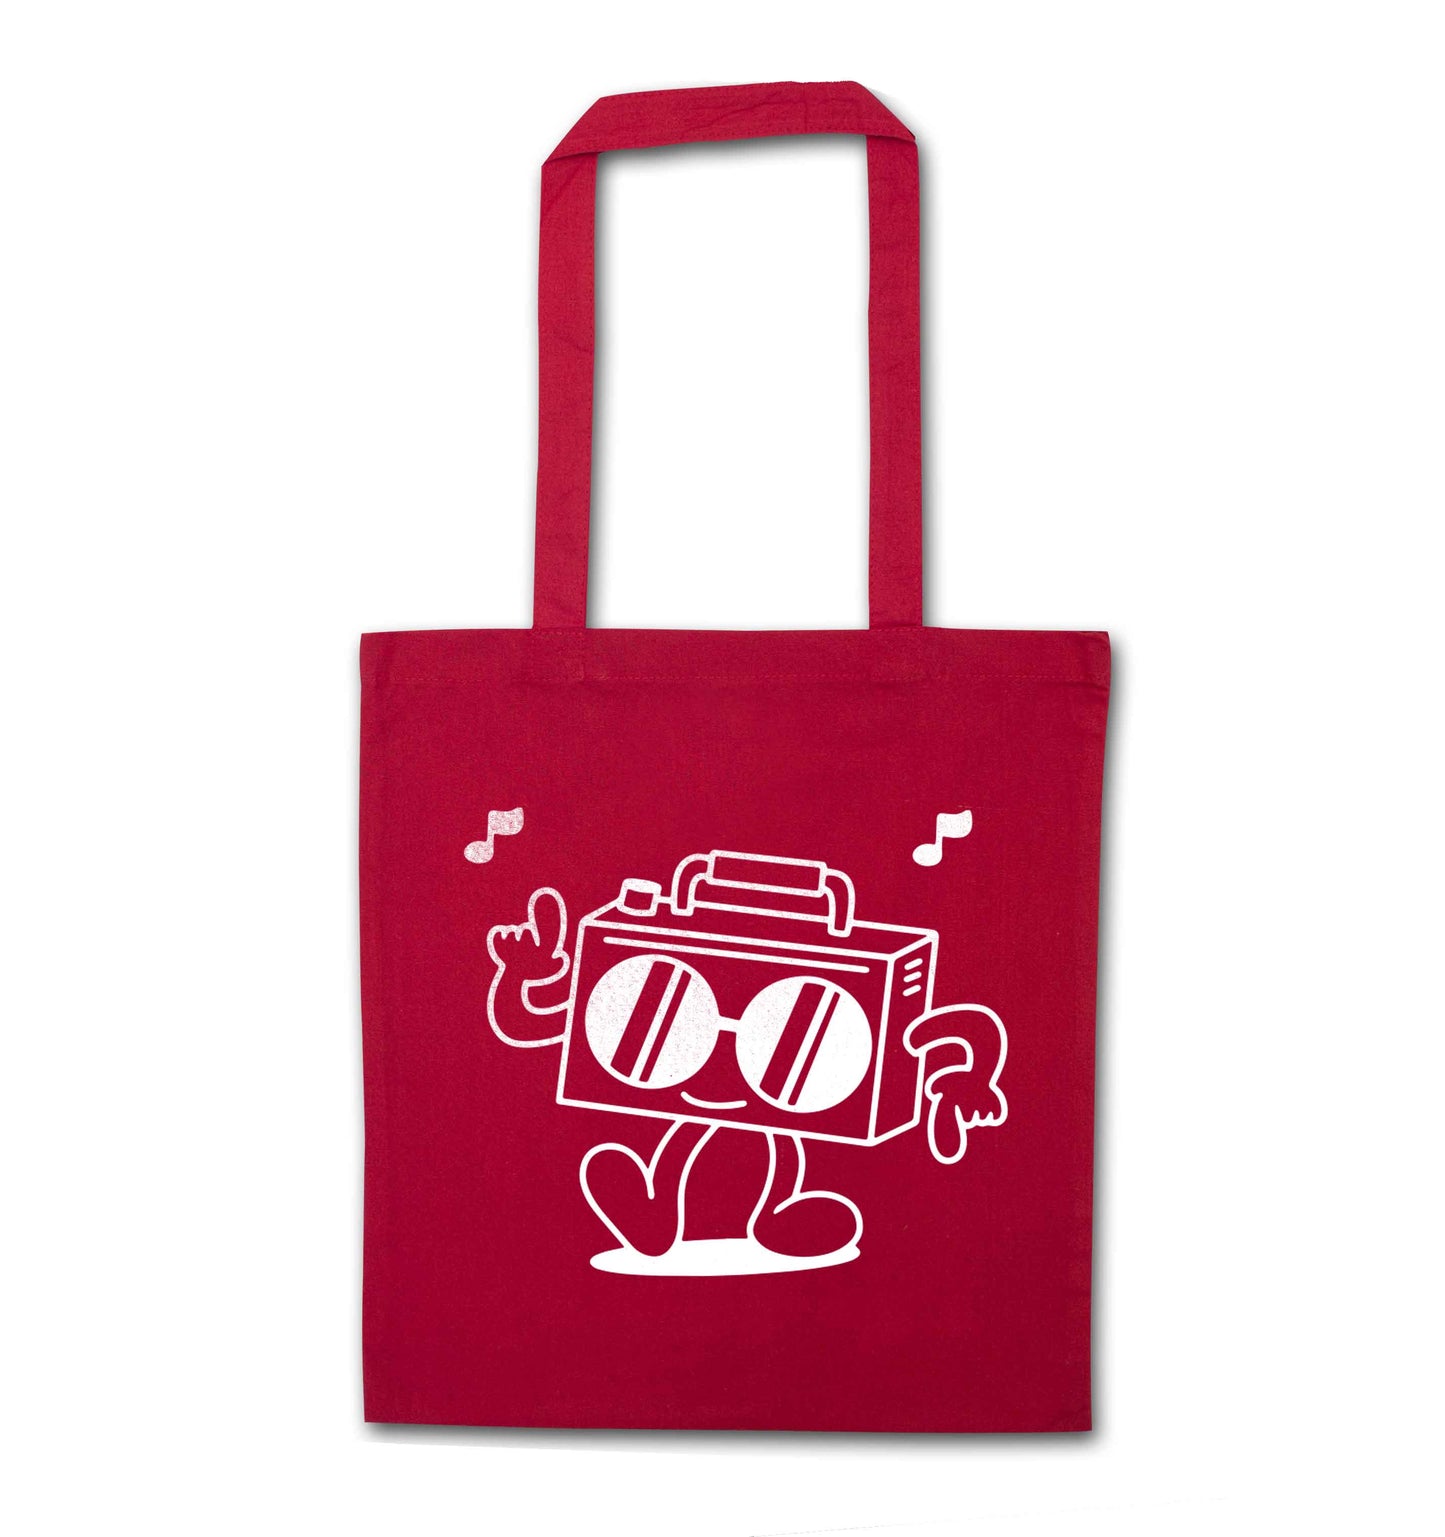 Boombox red tote bag